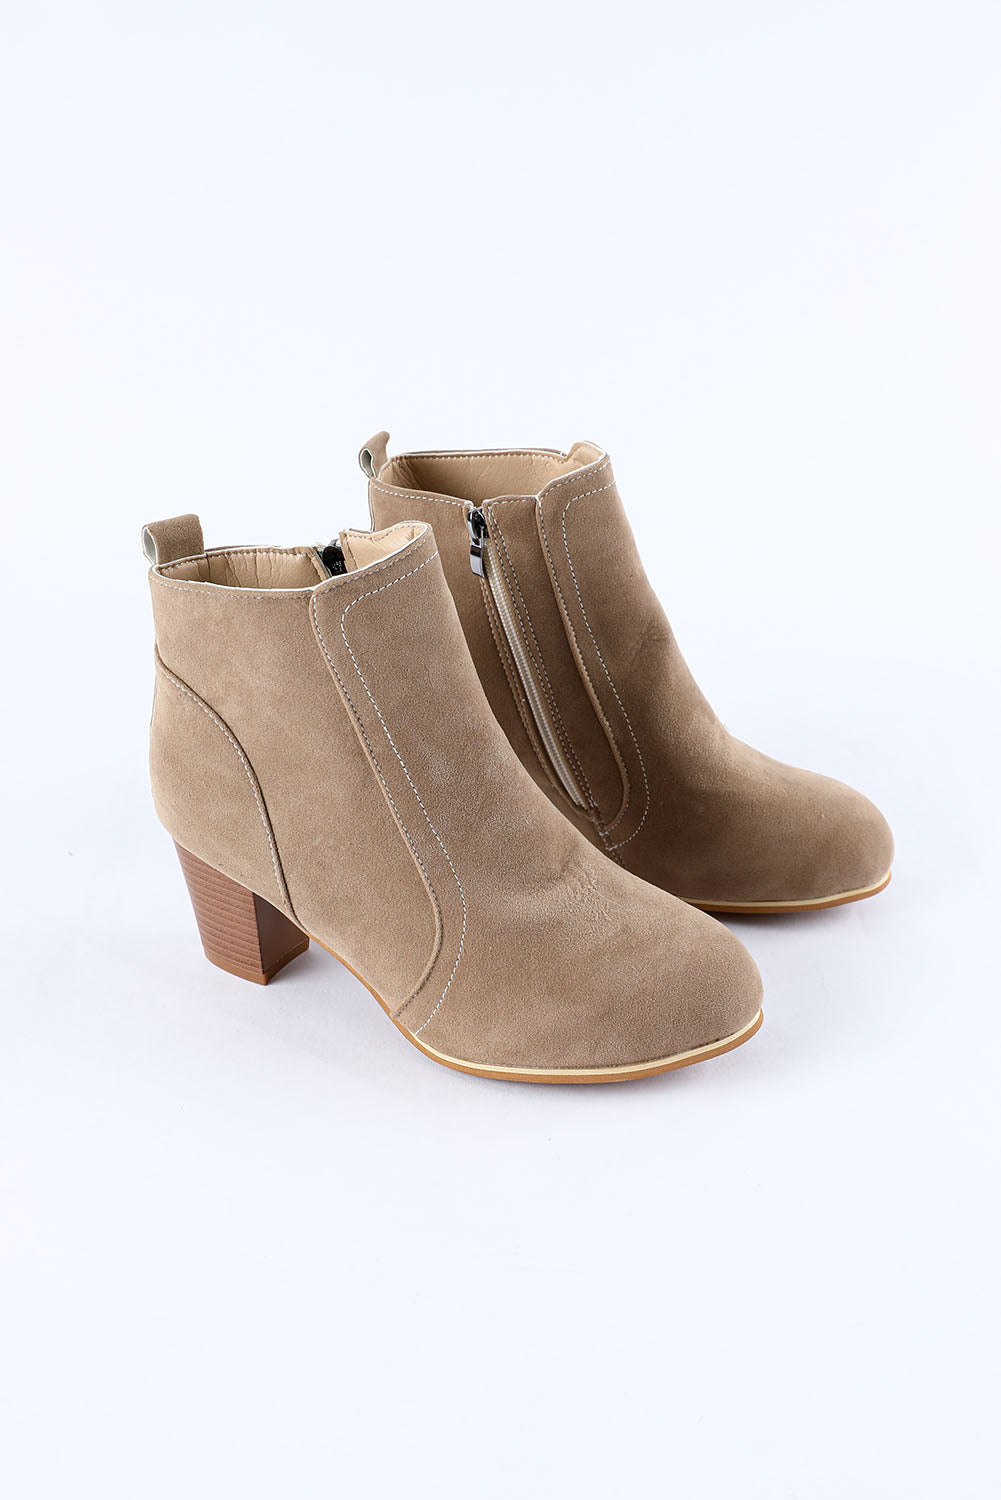 Faux Suede Size Zip Heeled Booties - SELFTRITSS